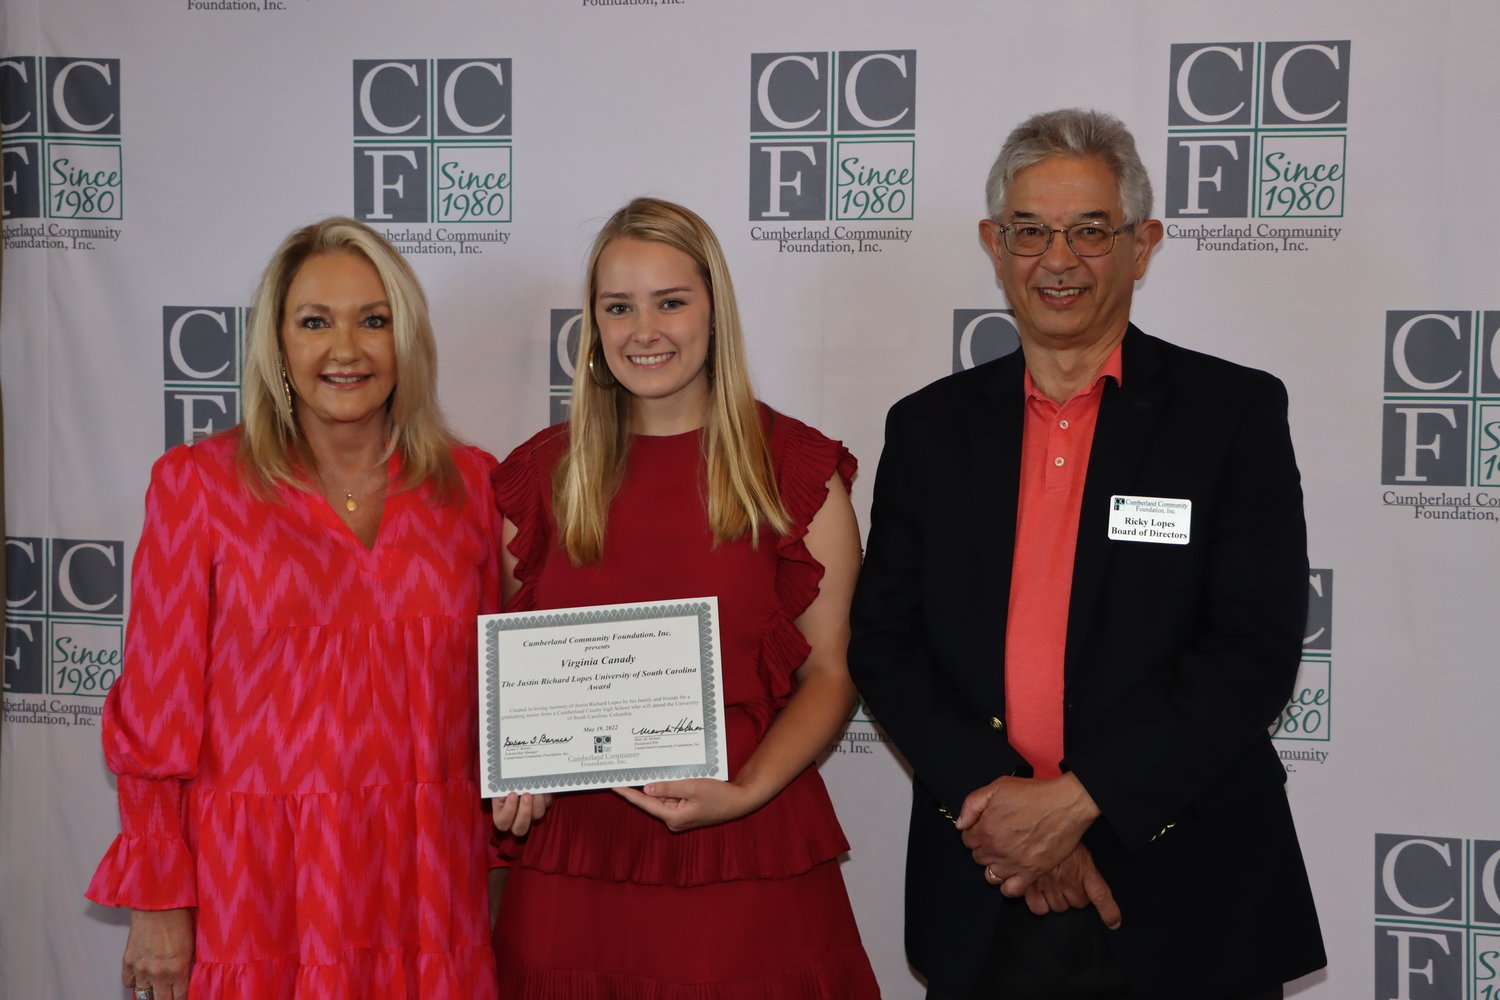 Virginia Canady, a senior at Terry Sanford High School, received the Linda Lee Allen Home Builders Scholarship and The Justin Richard Lopes University of South Carolina Award. Cumberland Community Foundation announced $765,375 in scholarship awards during a reception Thursday at Cape Fear Botanical Garden.